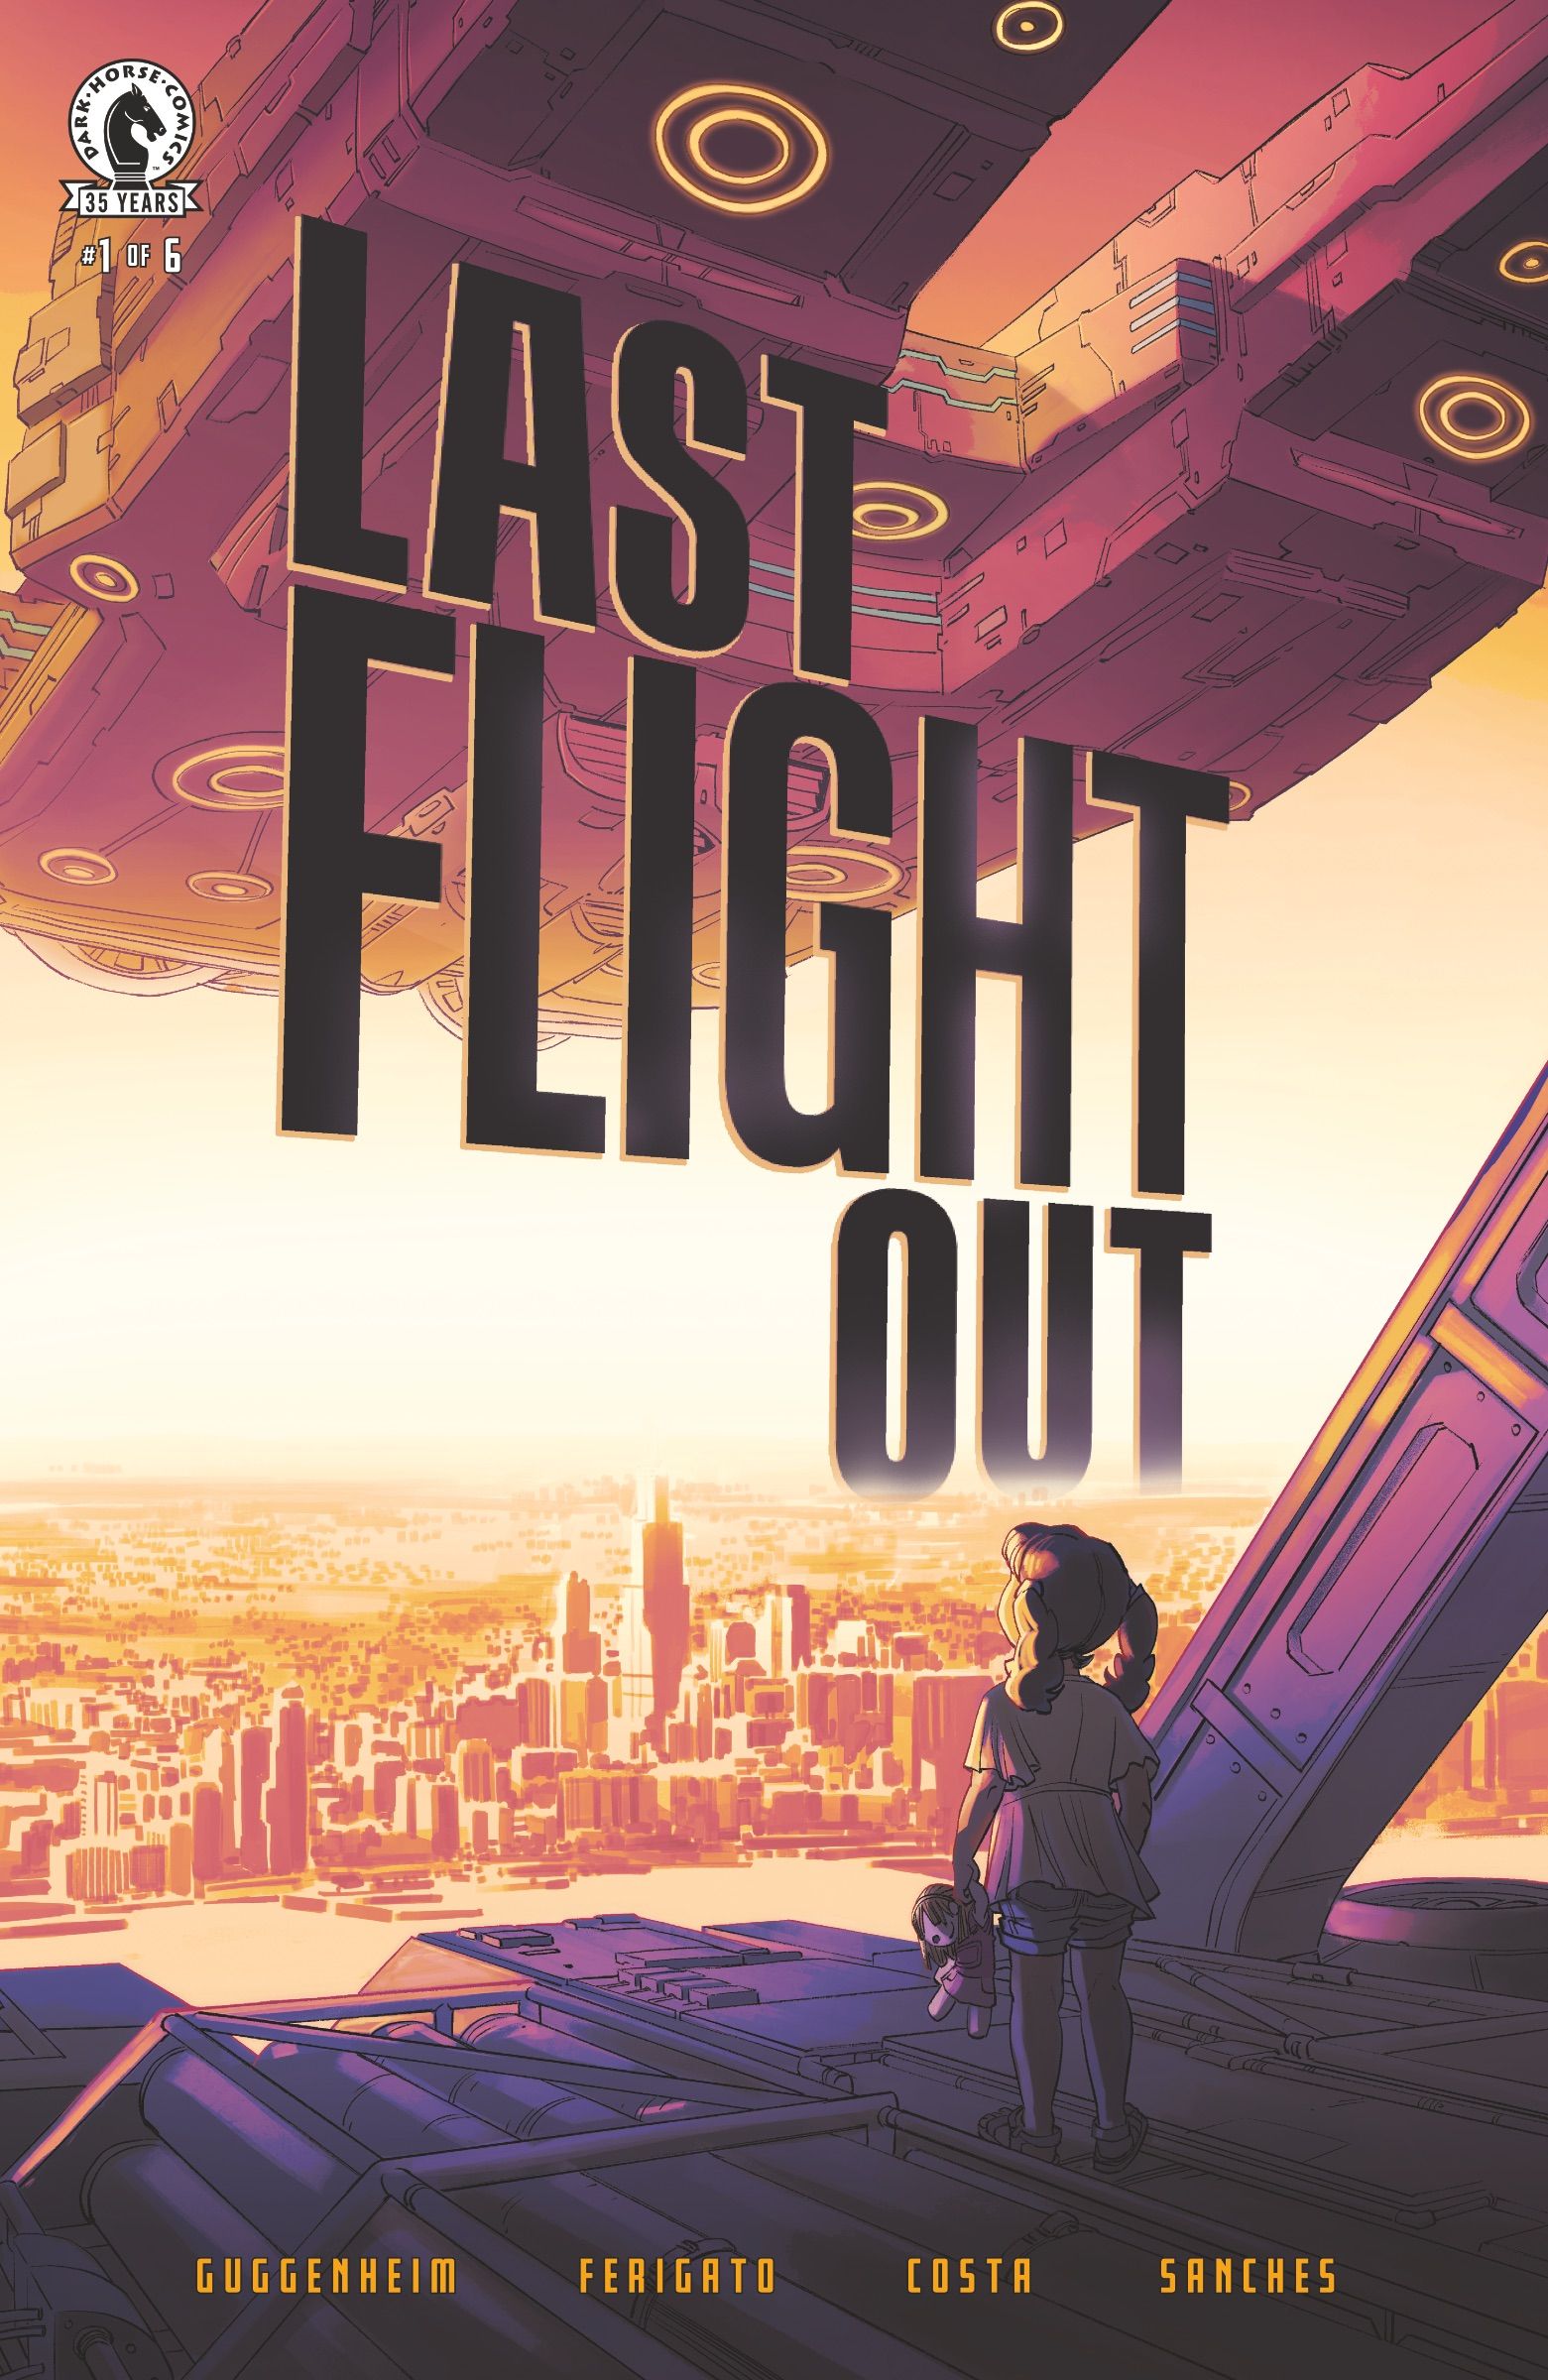 Last Flight Out #1 cover from Dark Horse Comics.